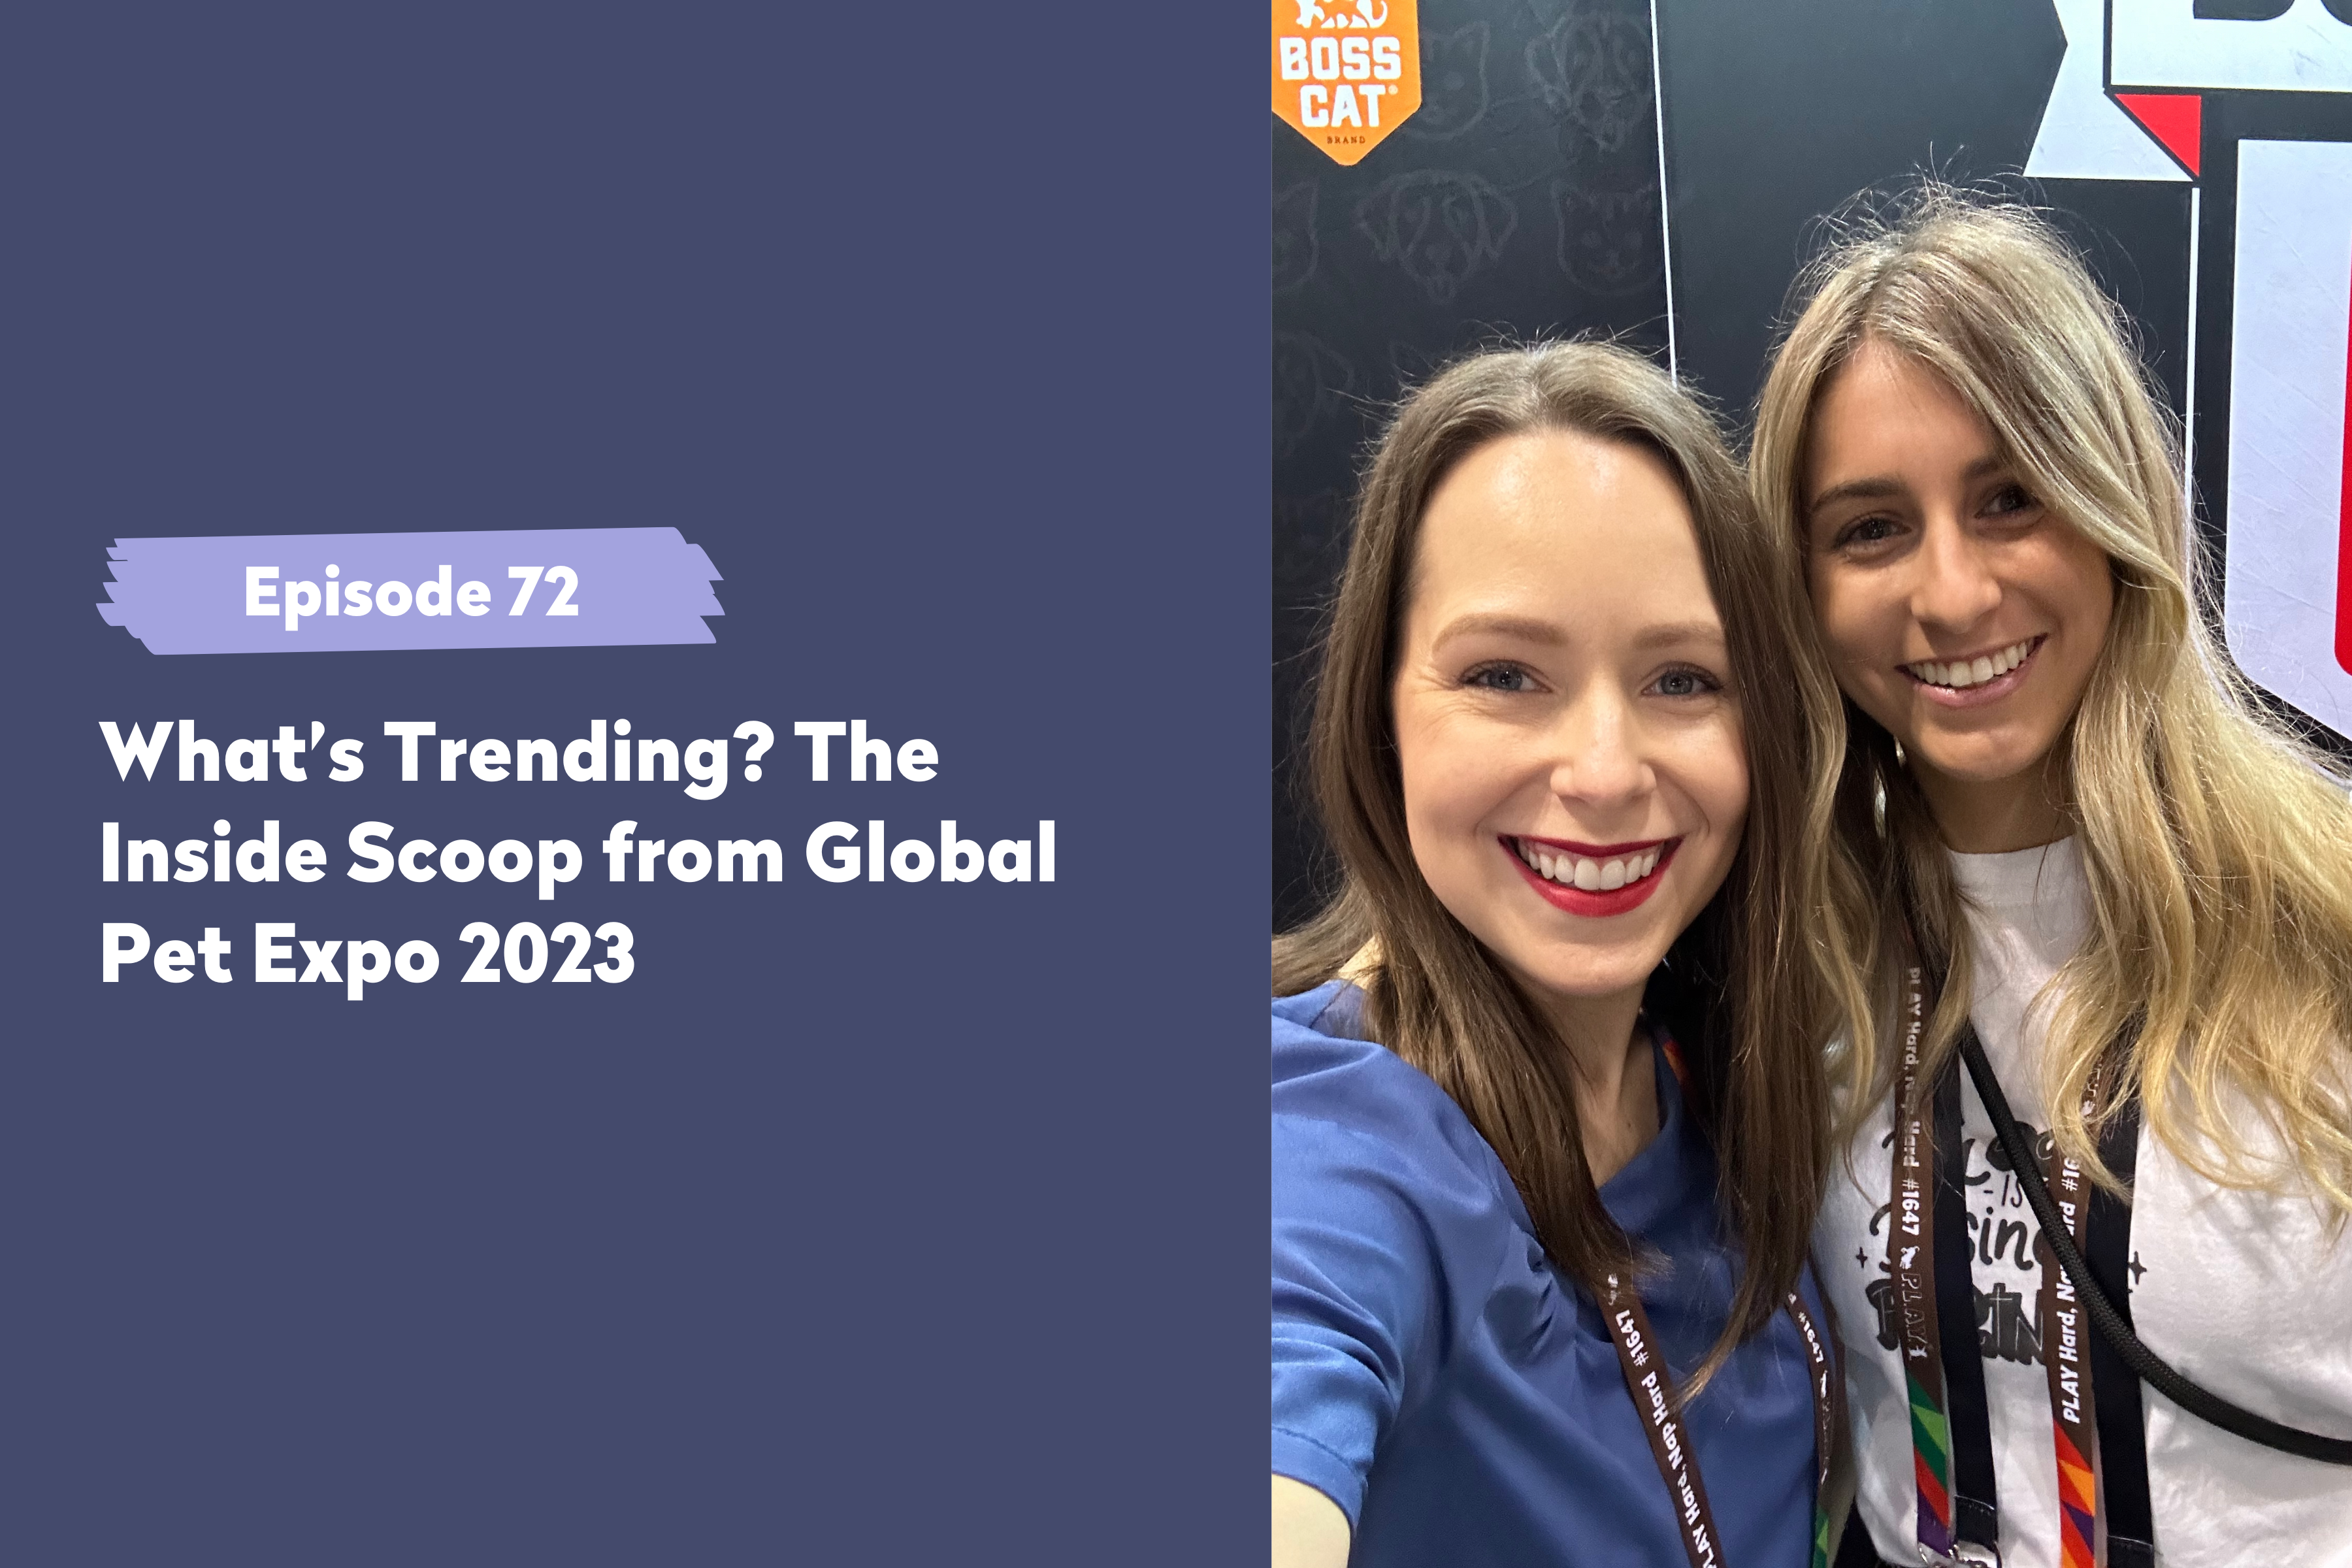 Episode 72 | What’s Trending? The Inside Scoop from Global Pet Expo 2023